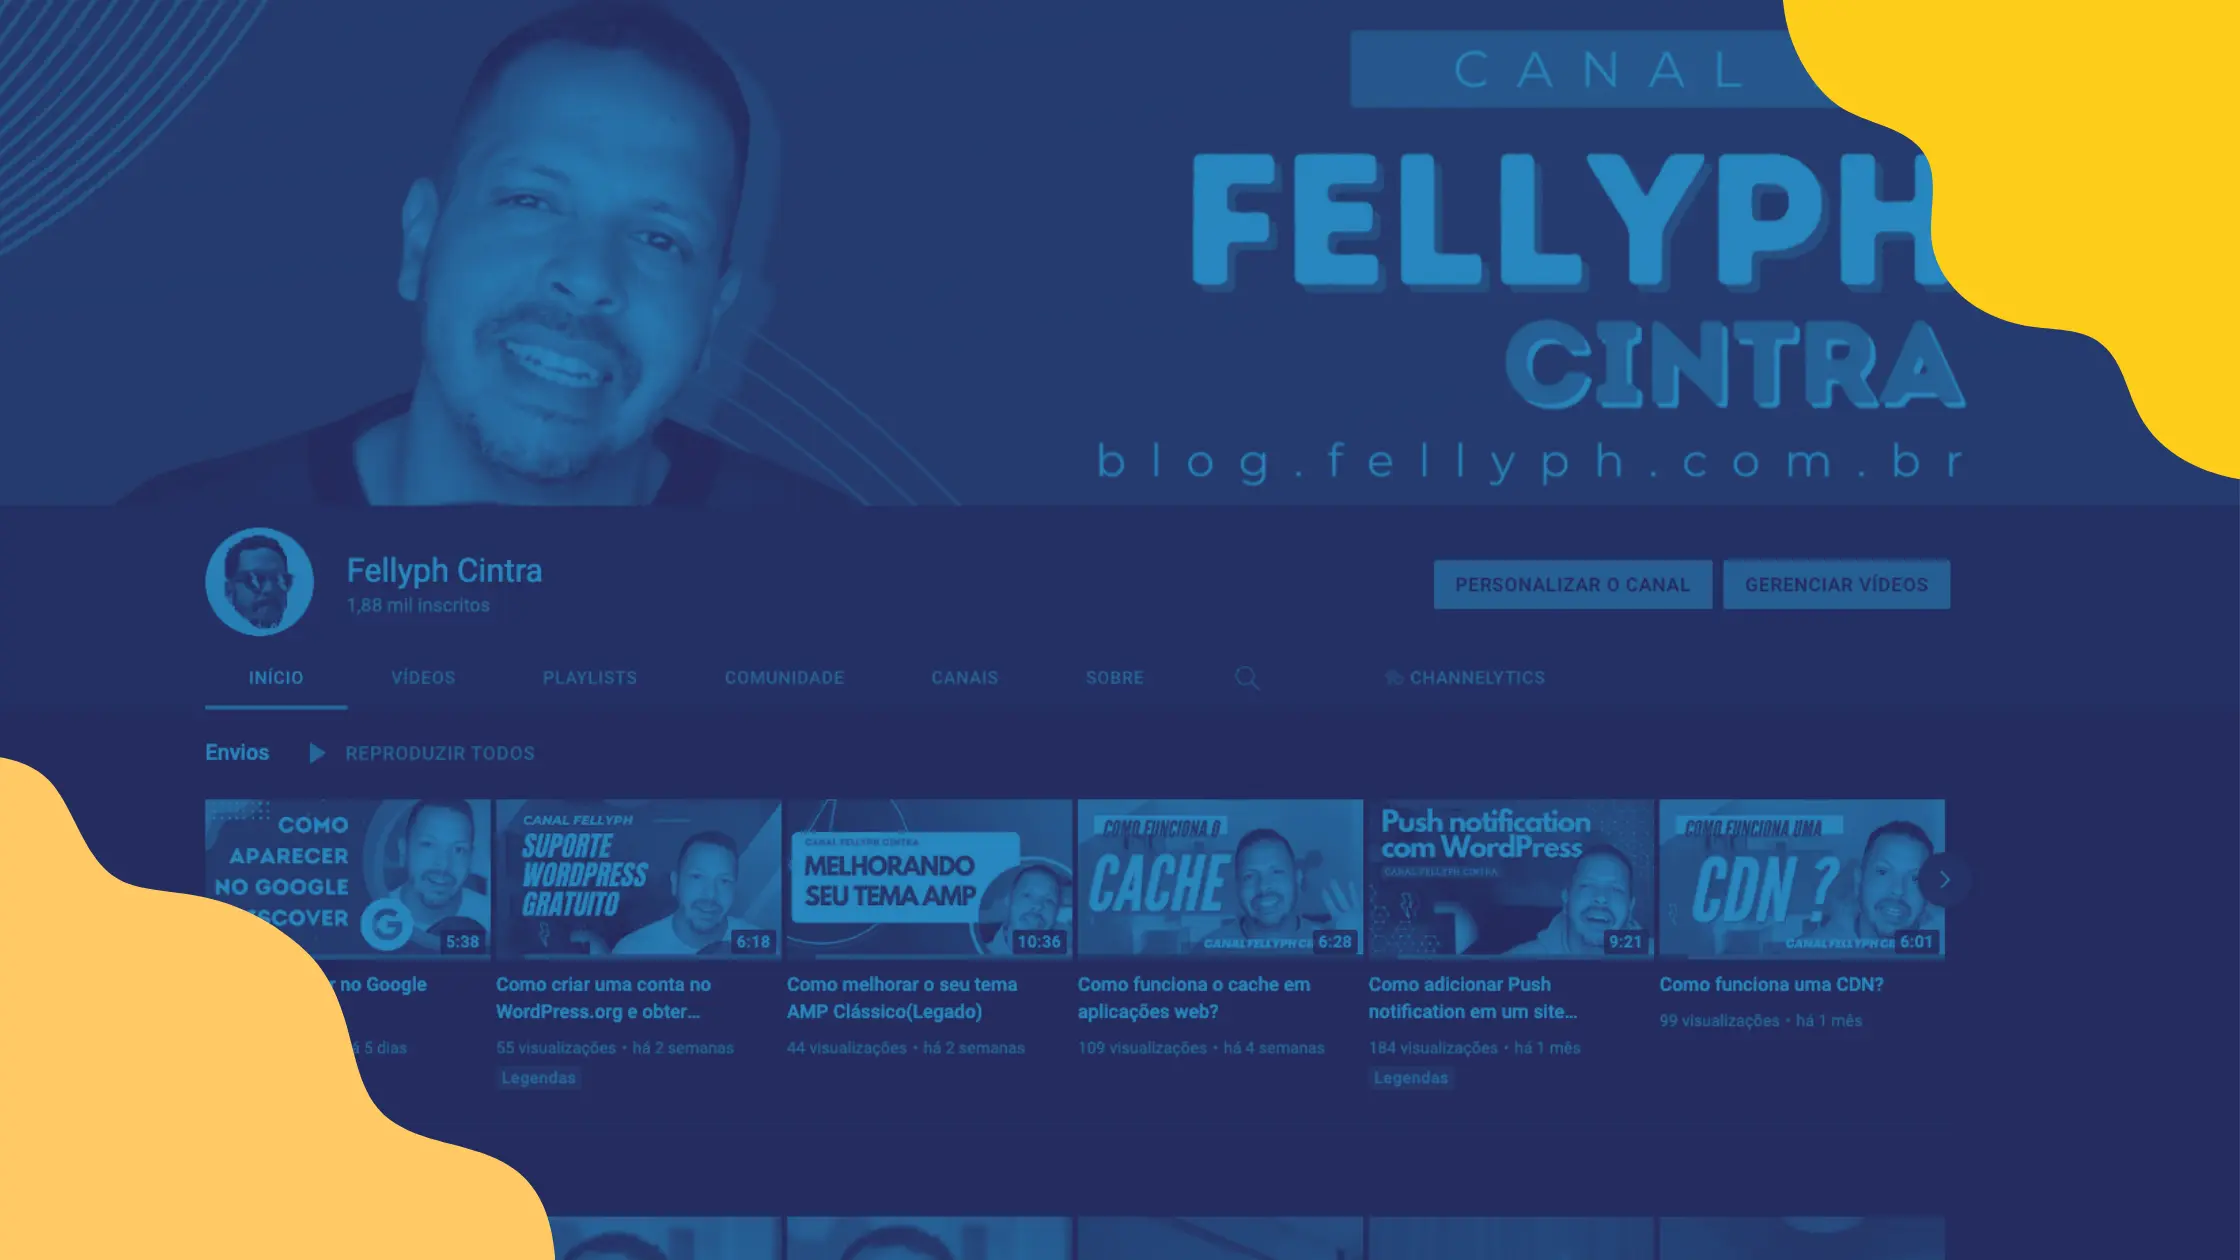 Canal Fellyph